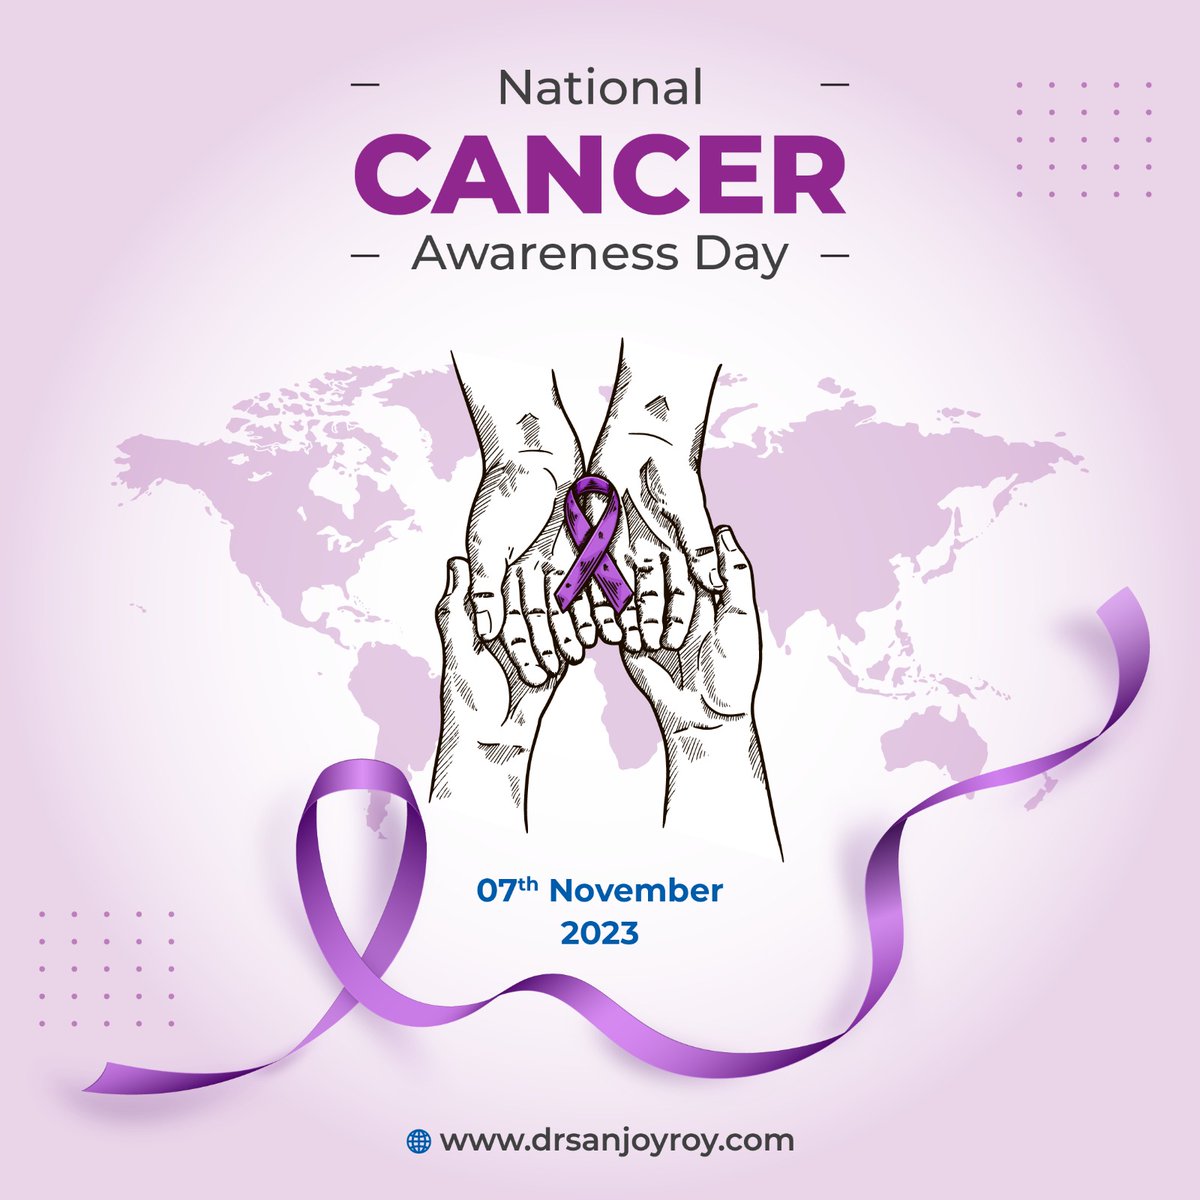 National Cancer Awareness Day is a significant event that takes place in India every year on November 7th. It is a day dedicated to raising awareness...
drsanjoyroy.com 
Call- 9830158619

#NationalCancerAwarenessDay #Oncology #RadiationOncologist #Kolkata #SanjoyRoy